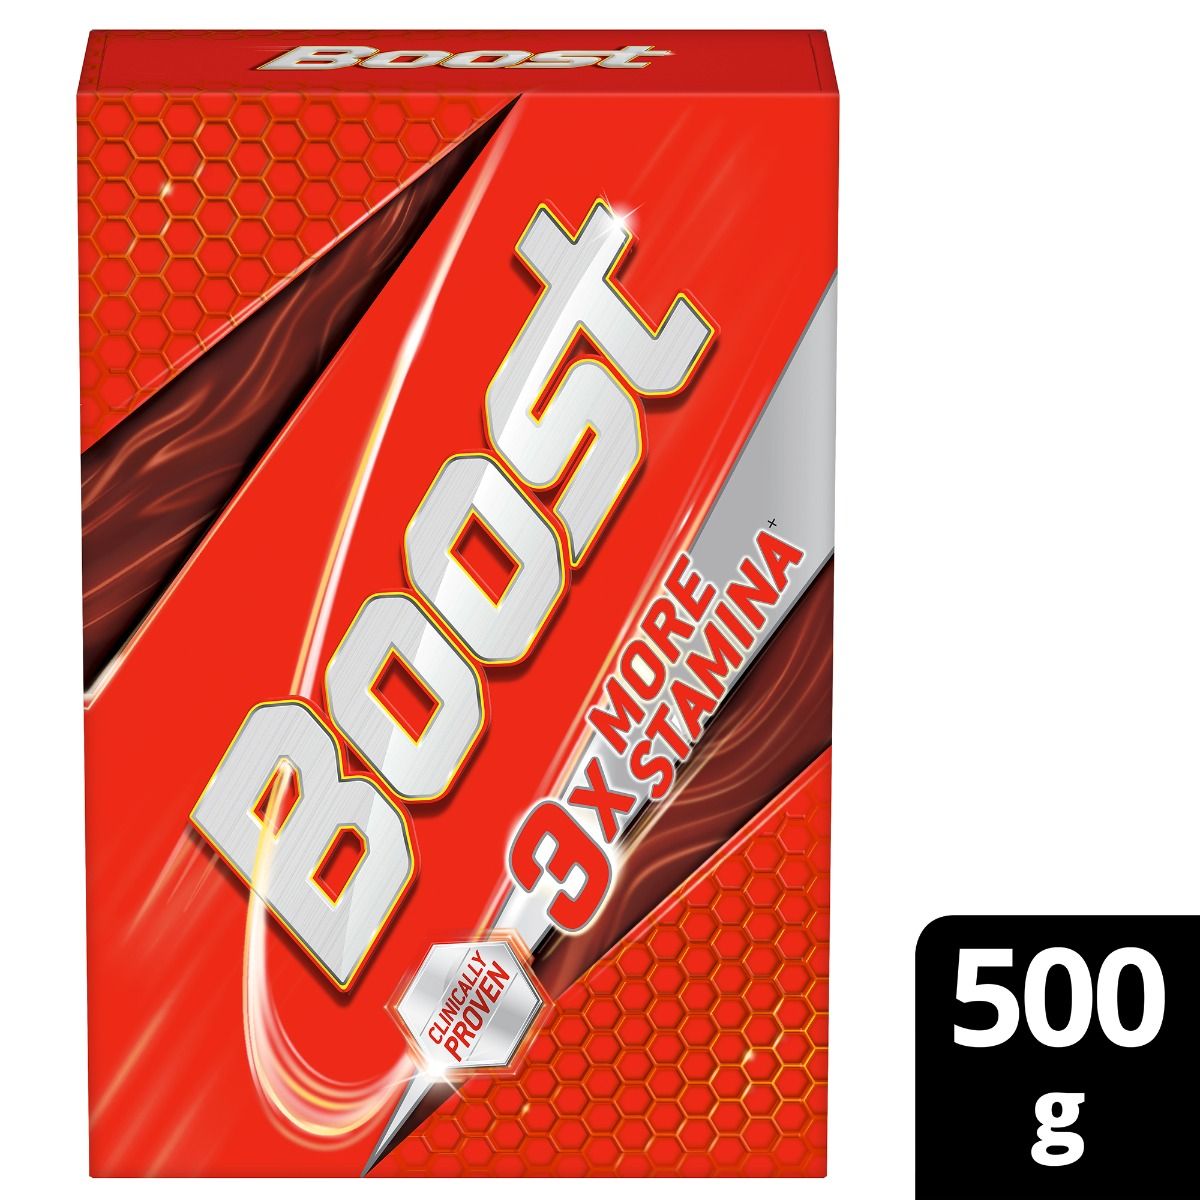 Buy Boost Health & Nutrition Drink, 500 gm Refill Pack Online